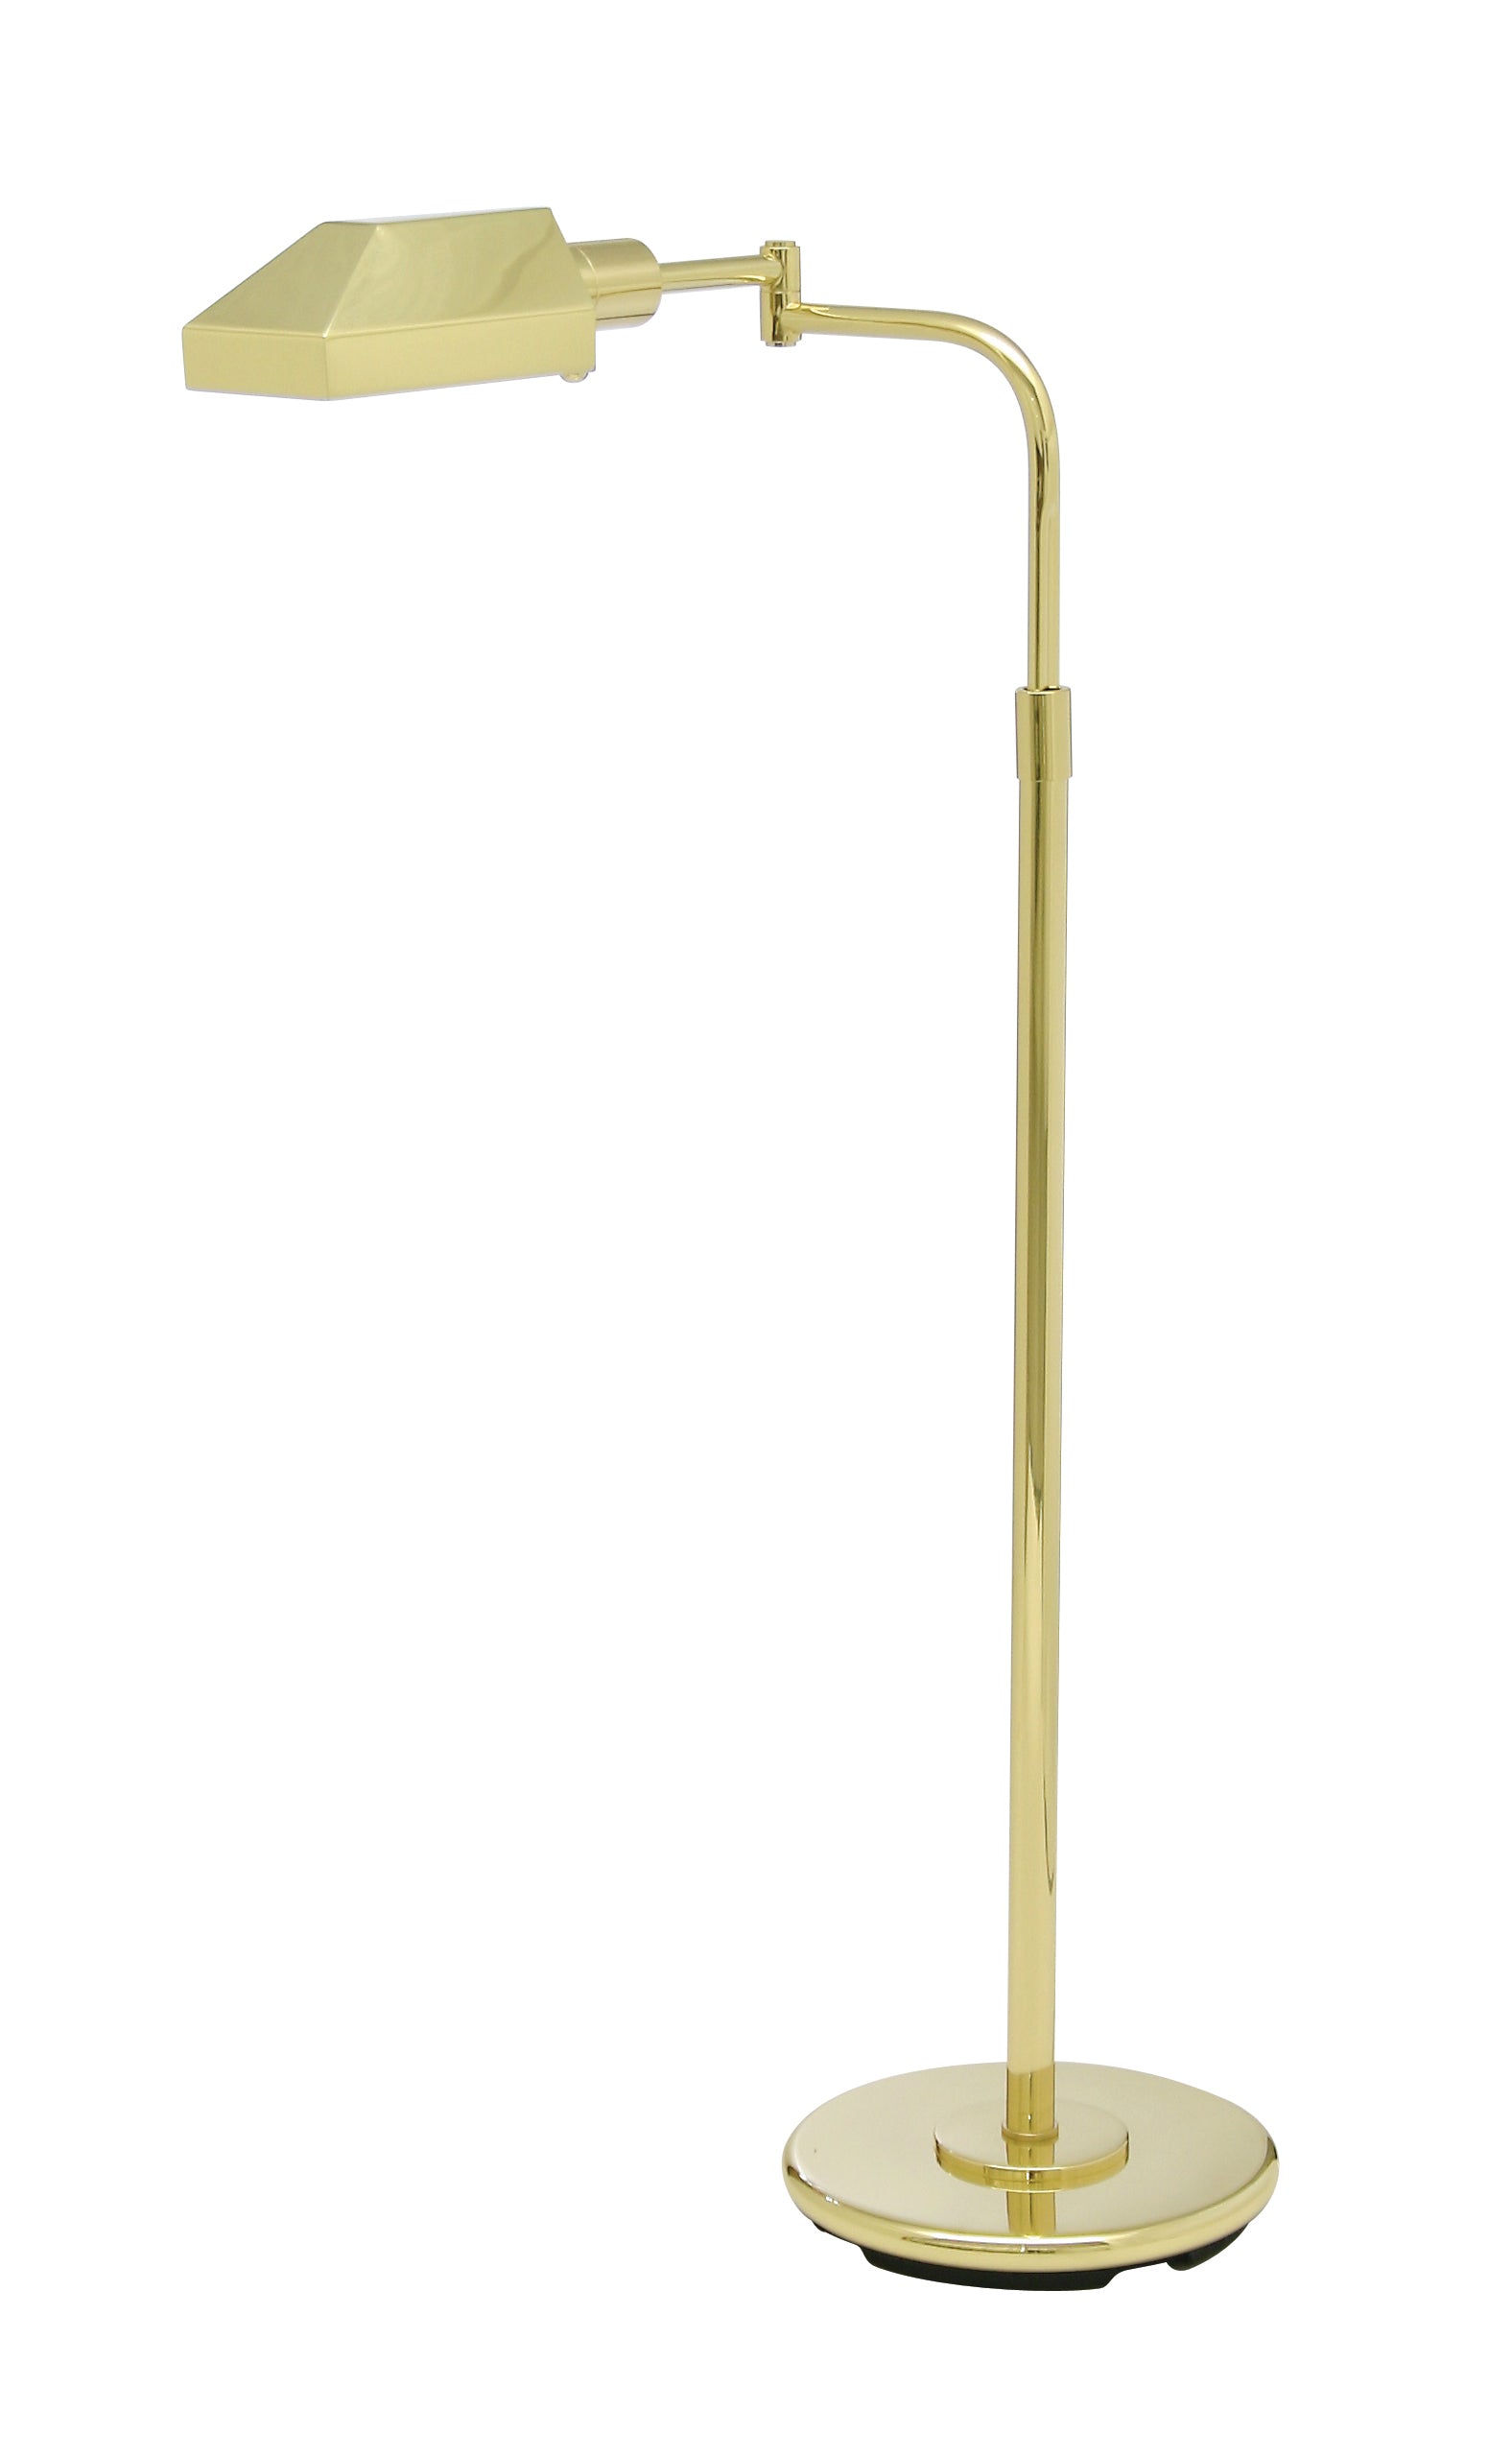 House of Troy Home/Office Polished Brass Floor Lamp PH100-61J